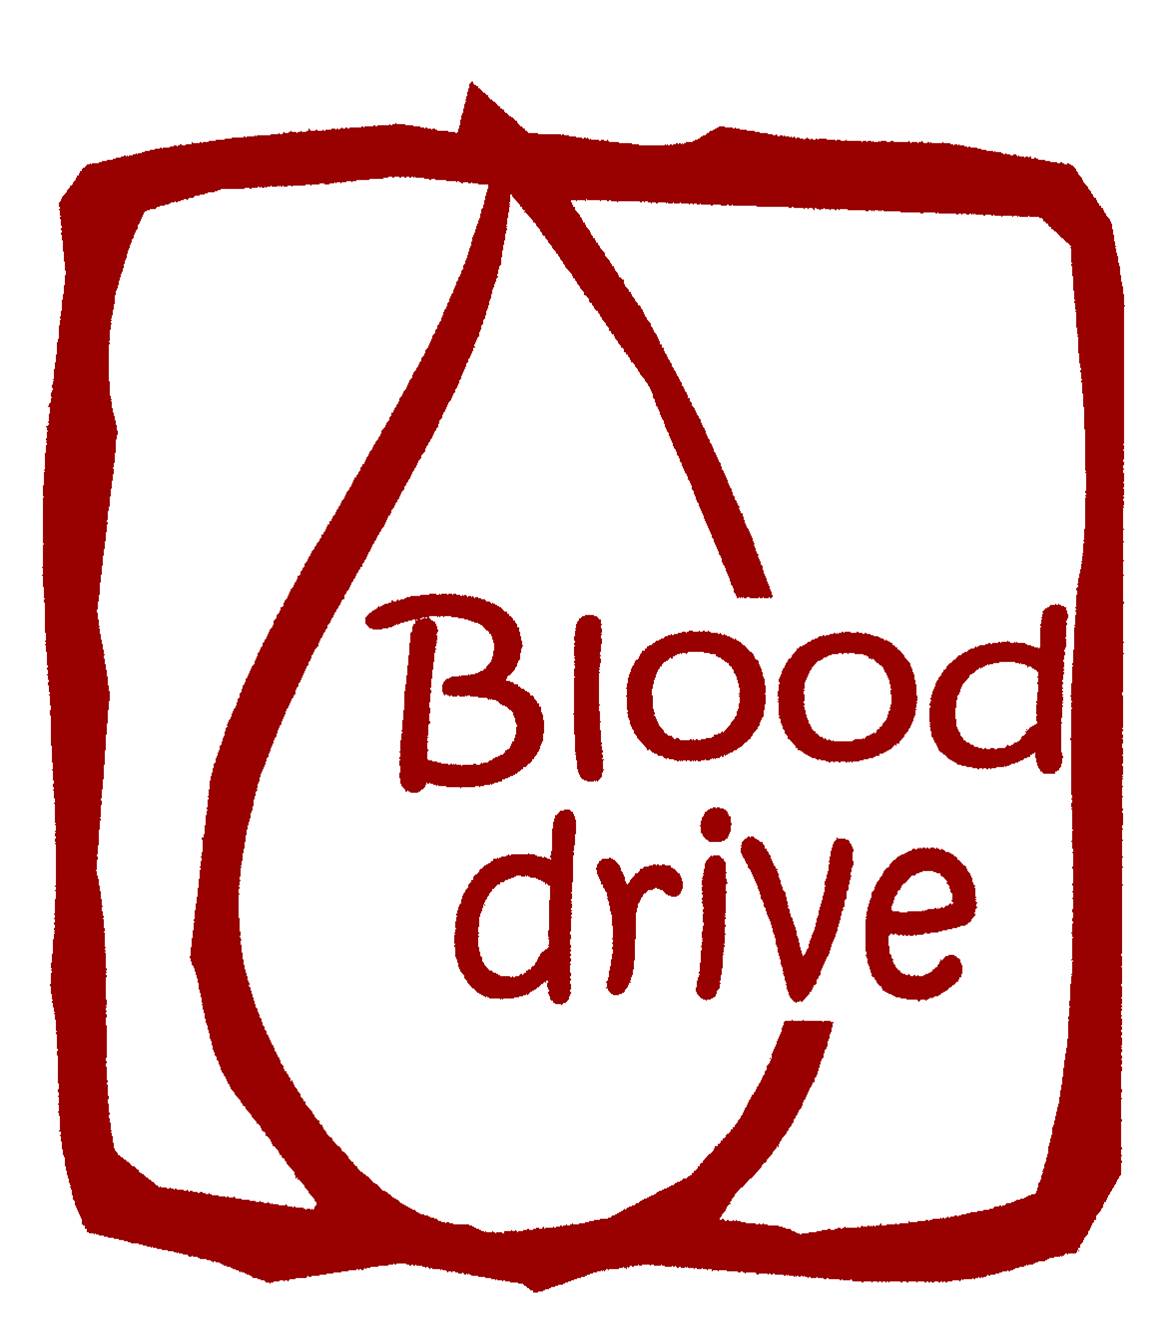 Blood drive thank you clipart